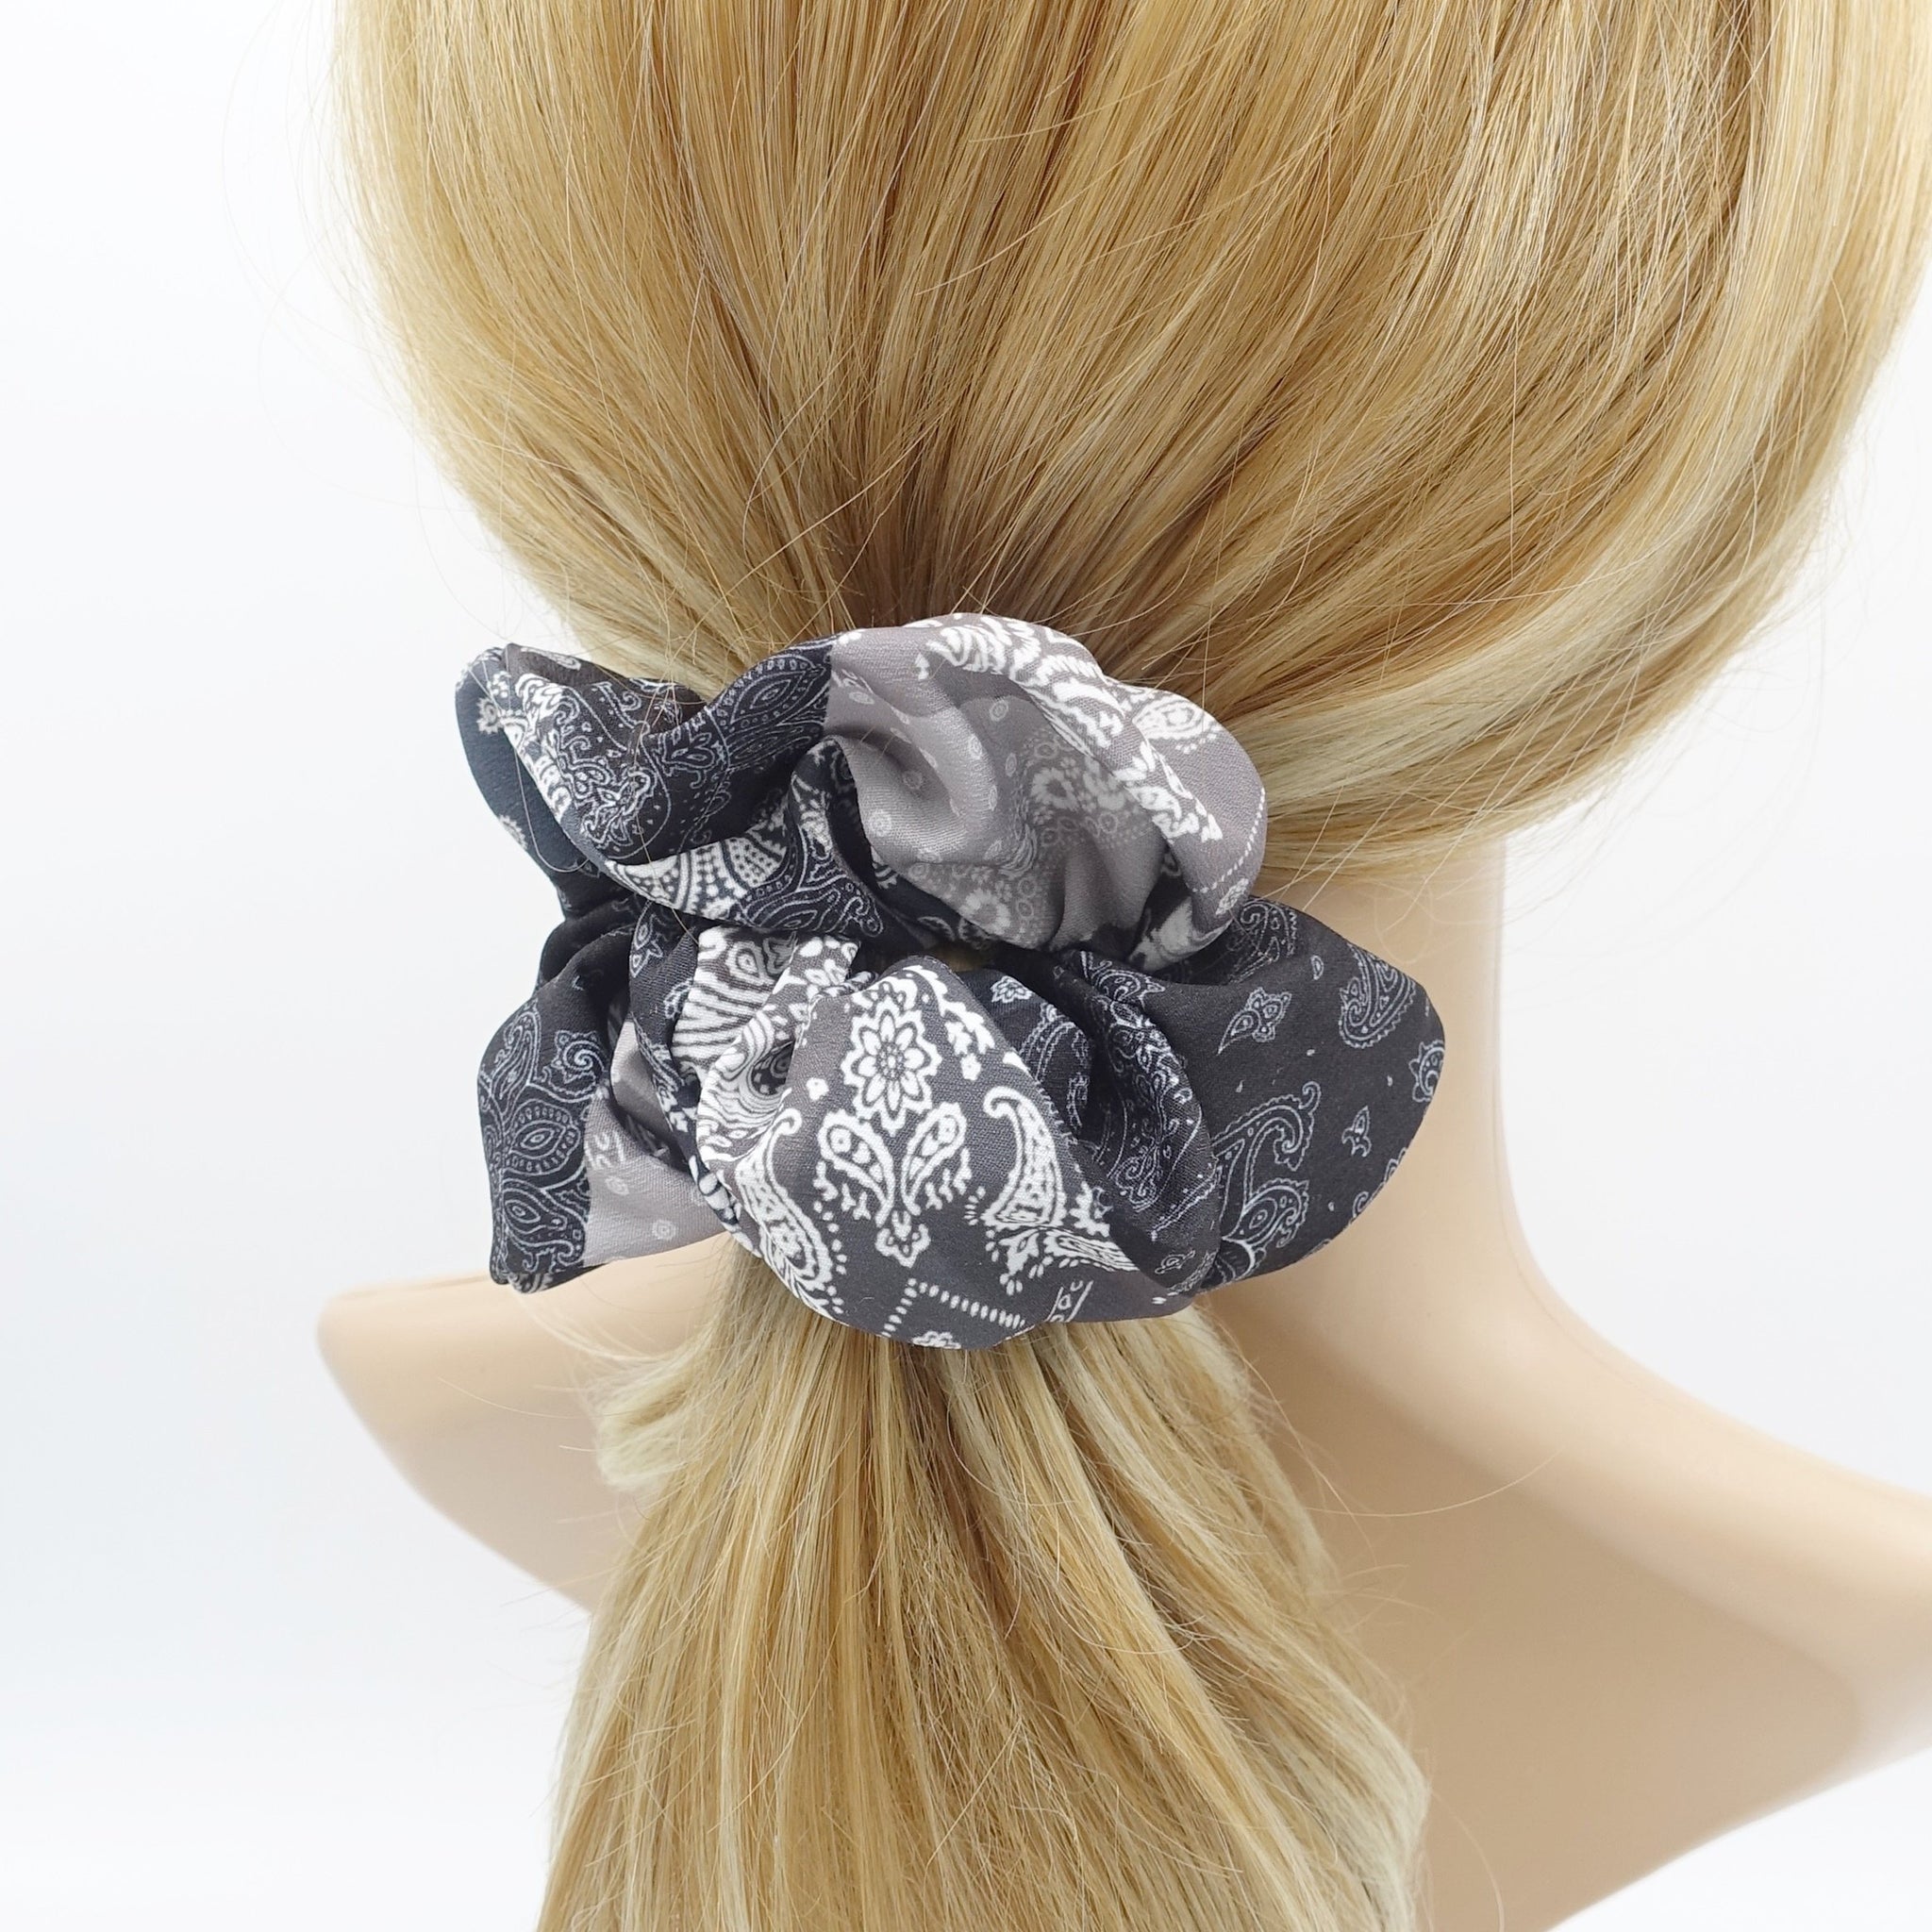 VeryShine gradated color paisley print scrunchies hair elastic accessory for women